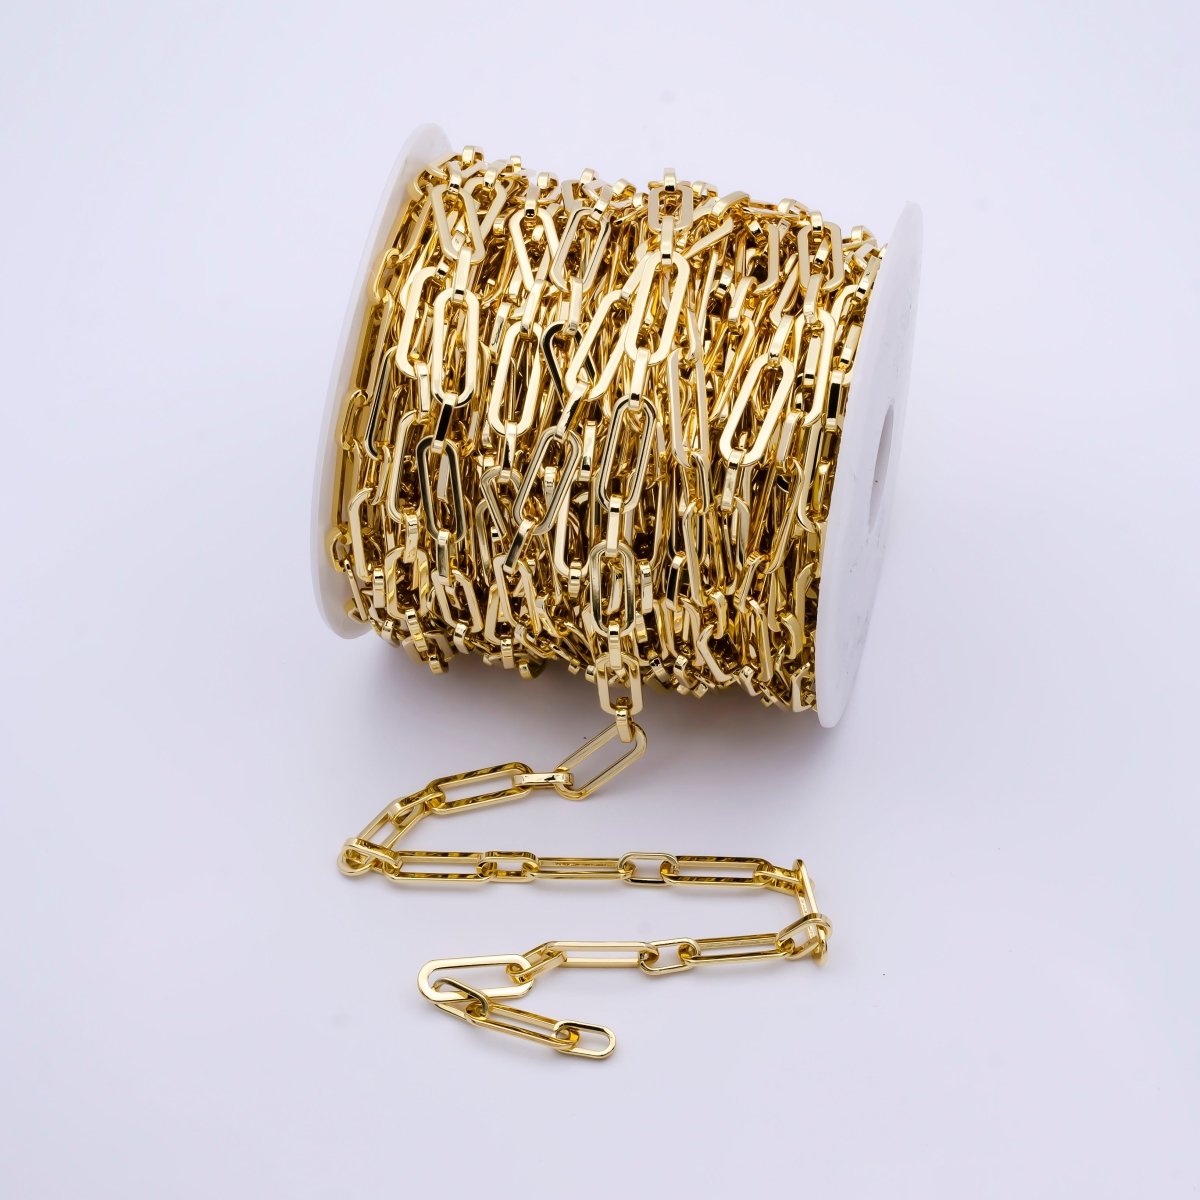 24K Gold Filled PaperClip Chain 20mmx7.5mm Elongated Unfinished Chain Wholesale by Yard | ROLL-828 Clearance Pricing - DLUXCA